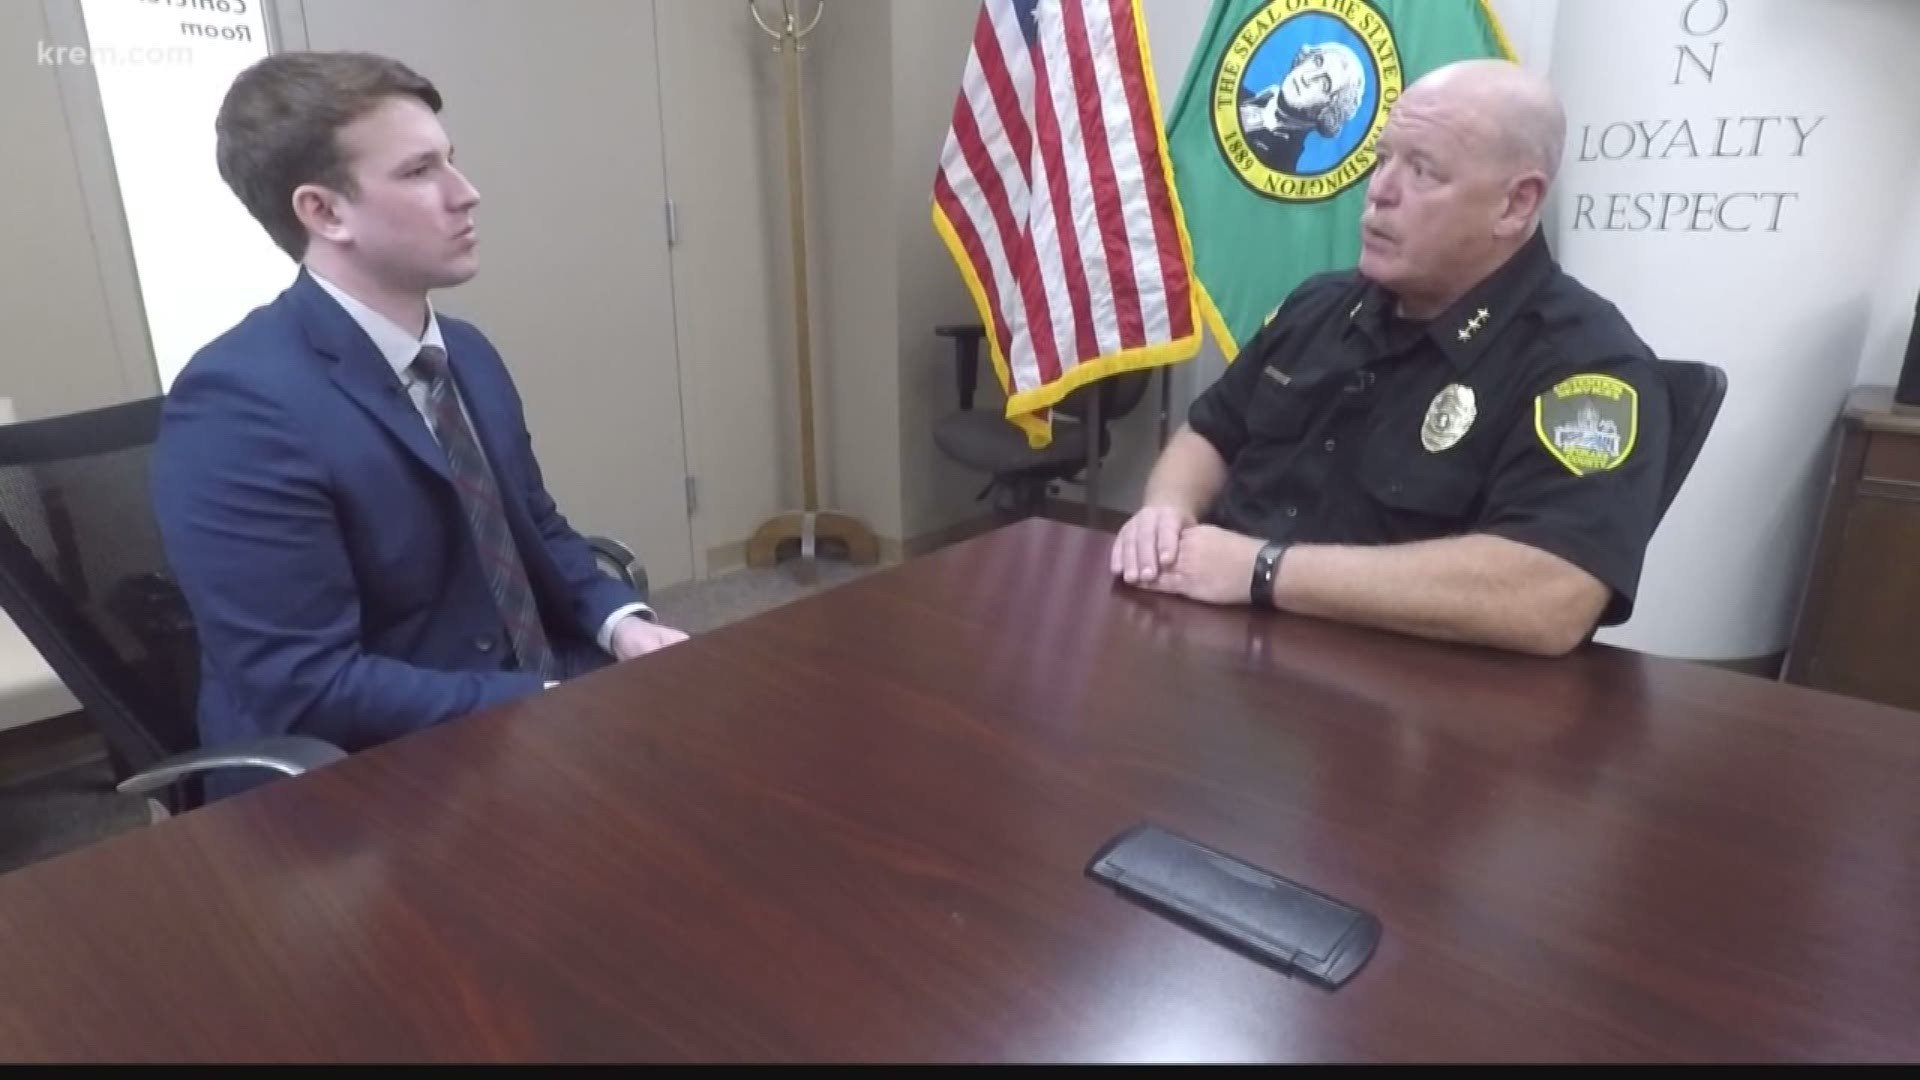 KREM's Ian Smay sat down with Spokane County Director of Detention Services to talk about the problems facing the jail and how medical care for inmates is handled.